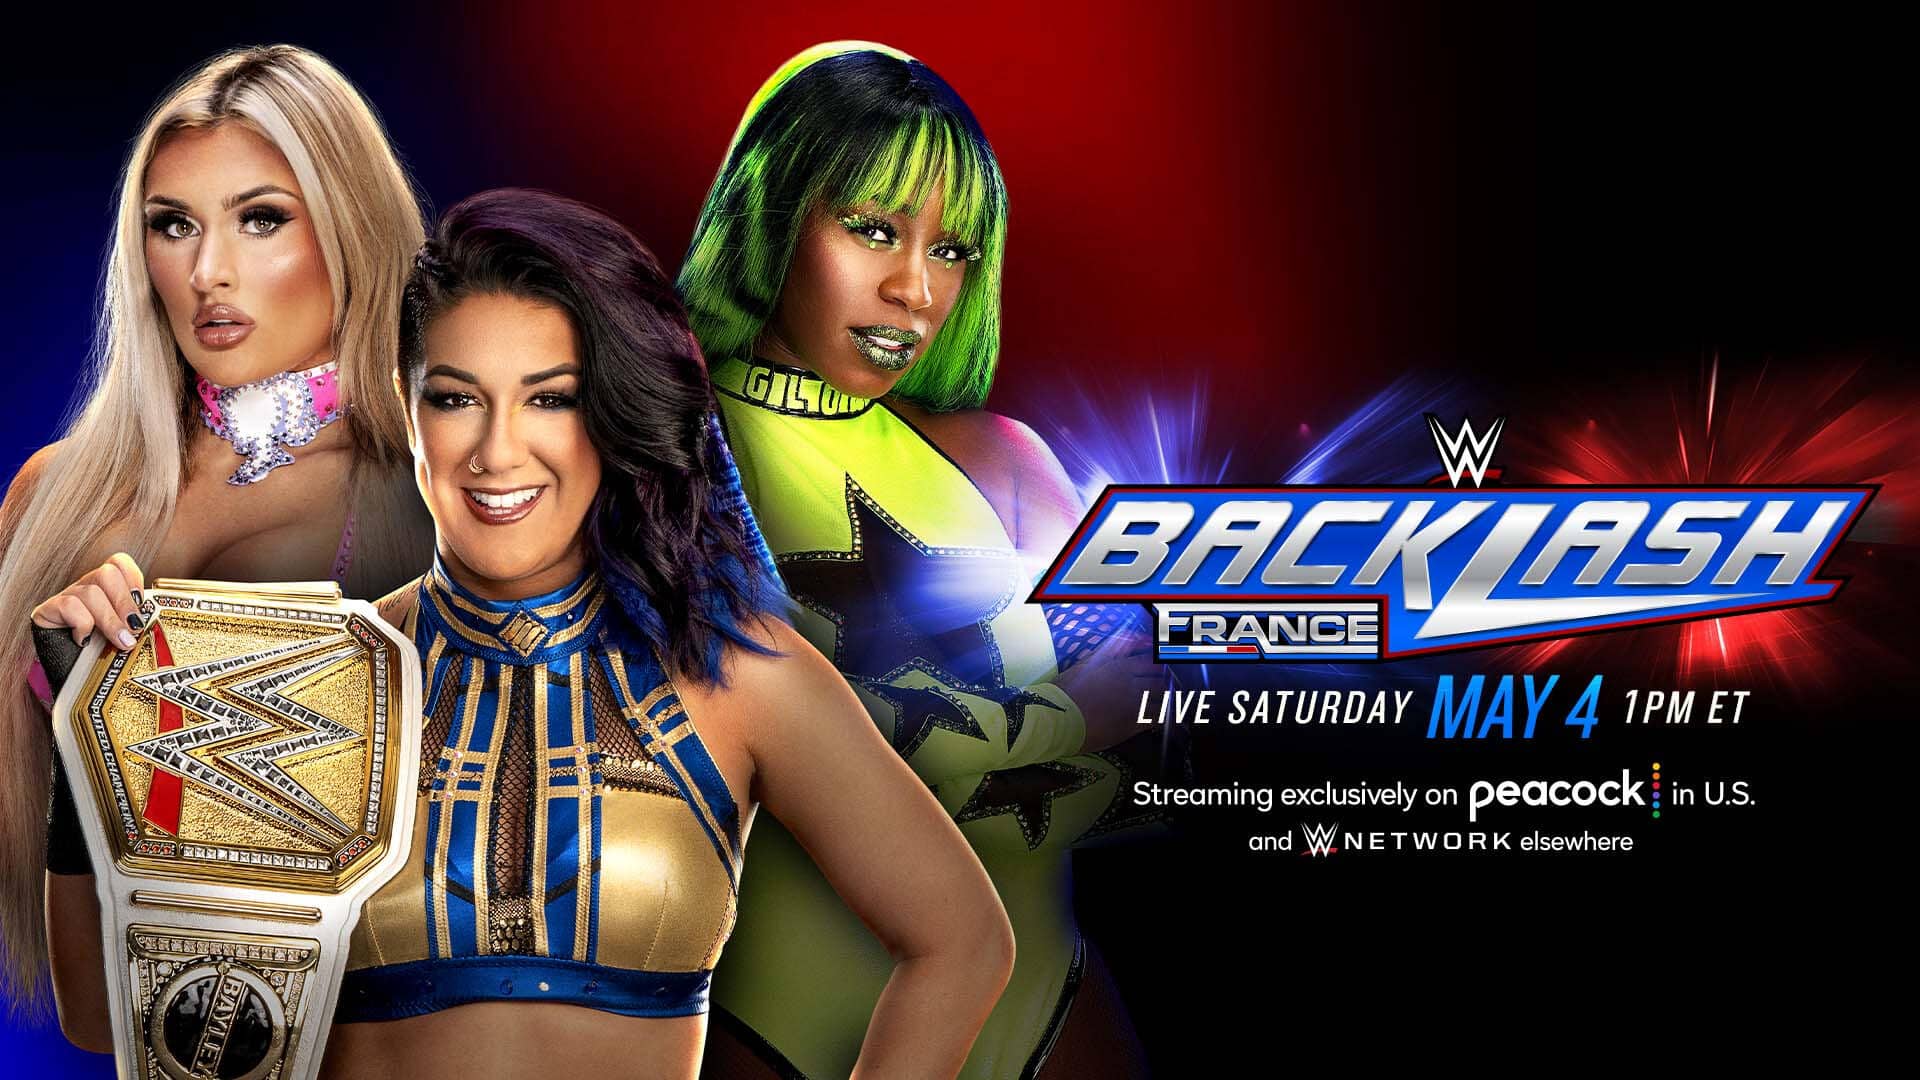 Bayley Successfully Defends Title Against Naomi & Tiffany Stratton at WWE Backlash: France